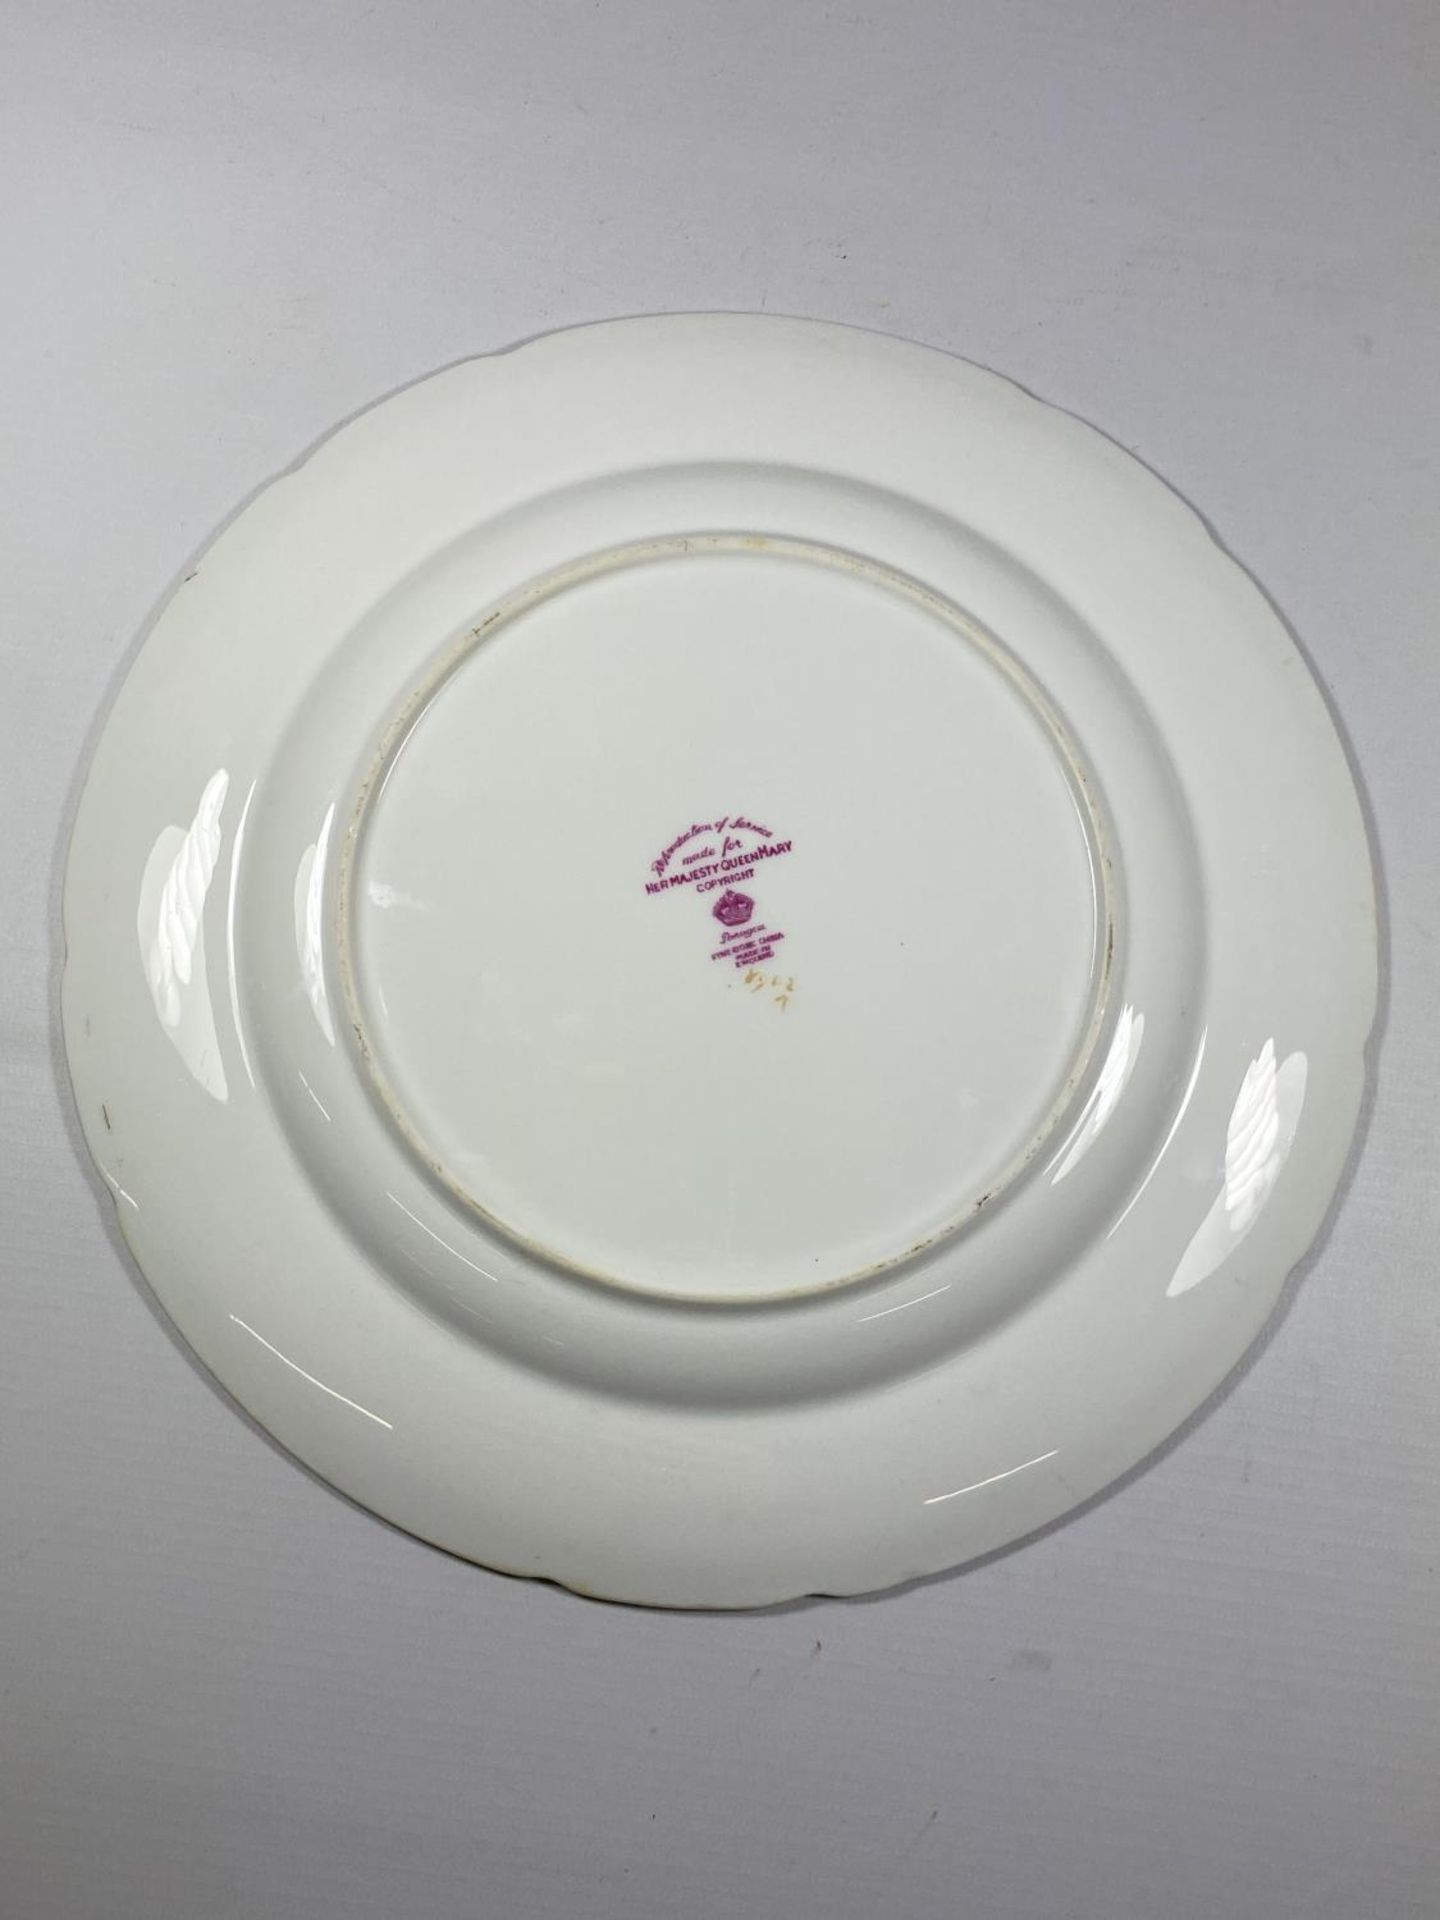 A HAND PAINTED FLORAL CABINET PLATE, SIGNED A.HOLLAND - Image 3 of 3